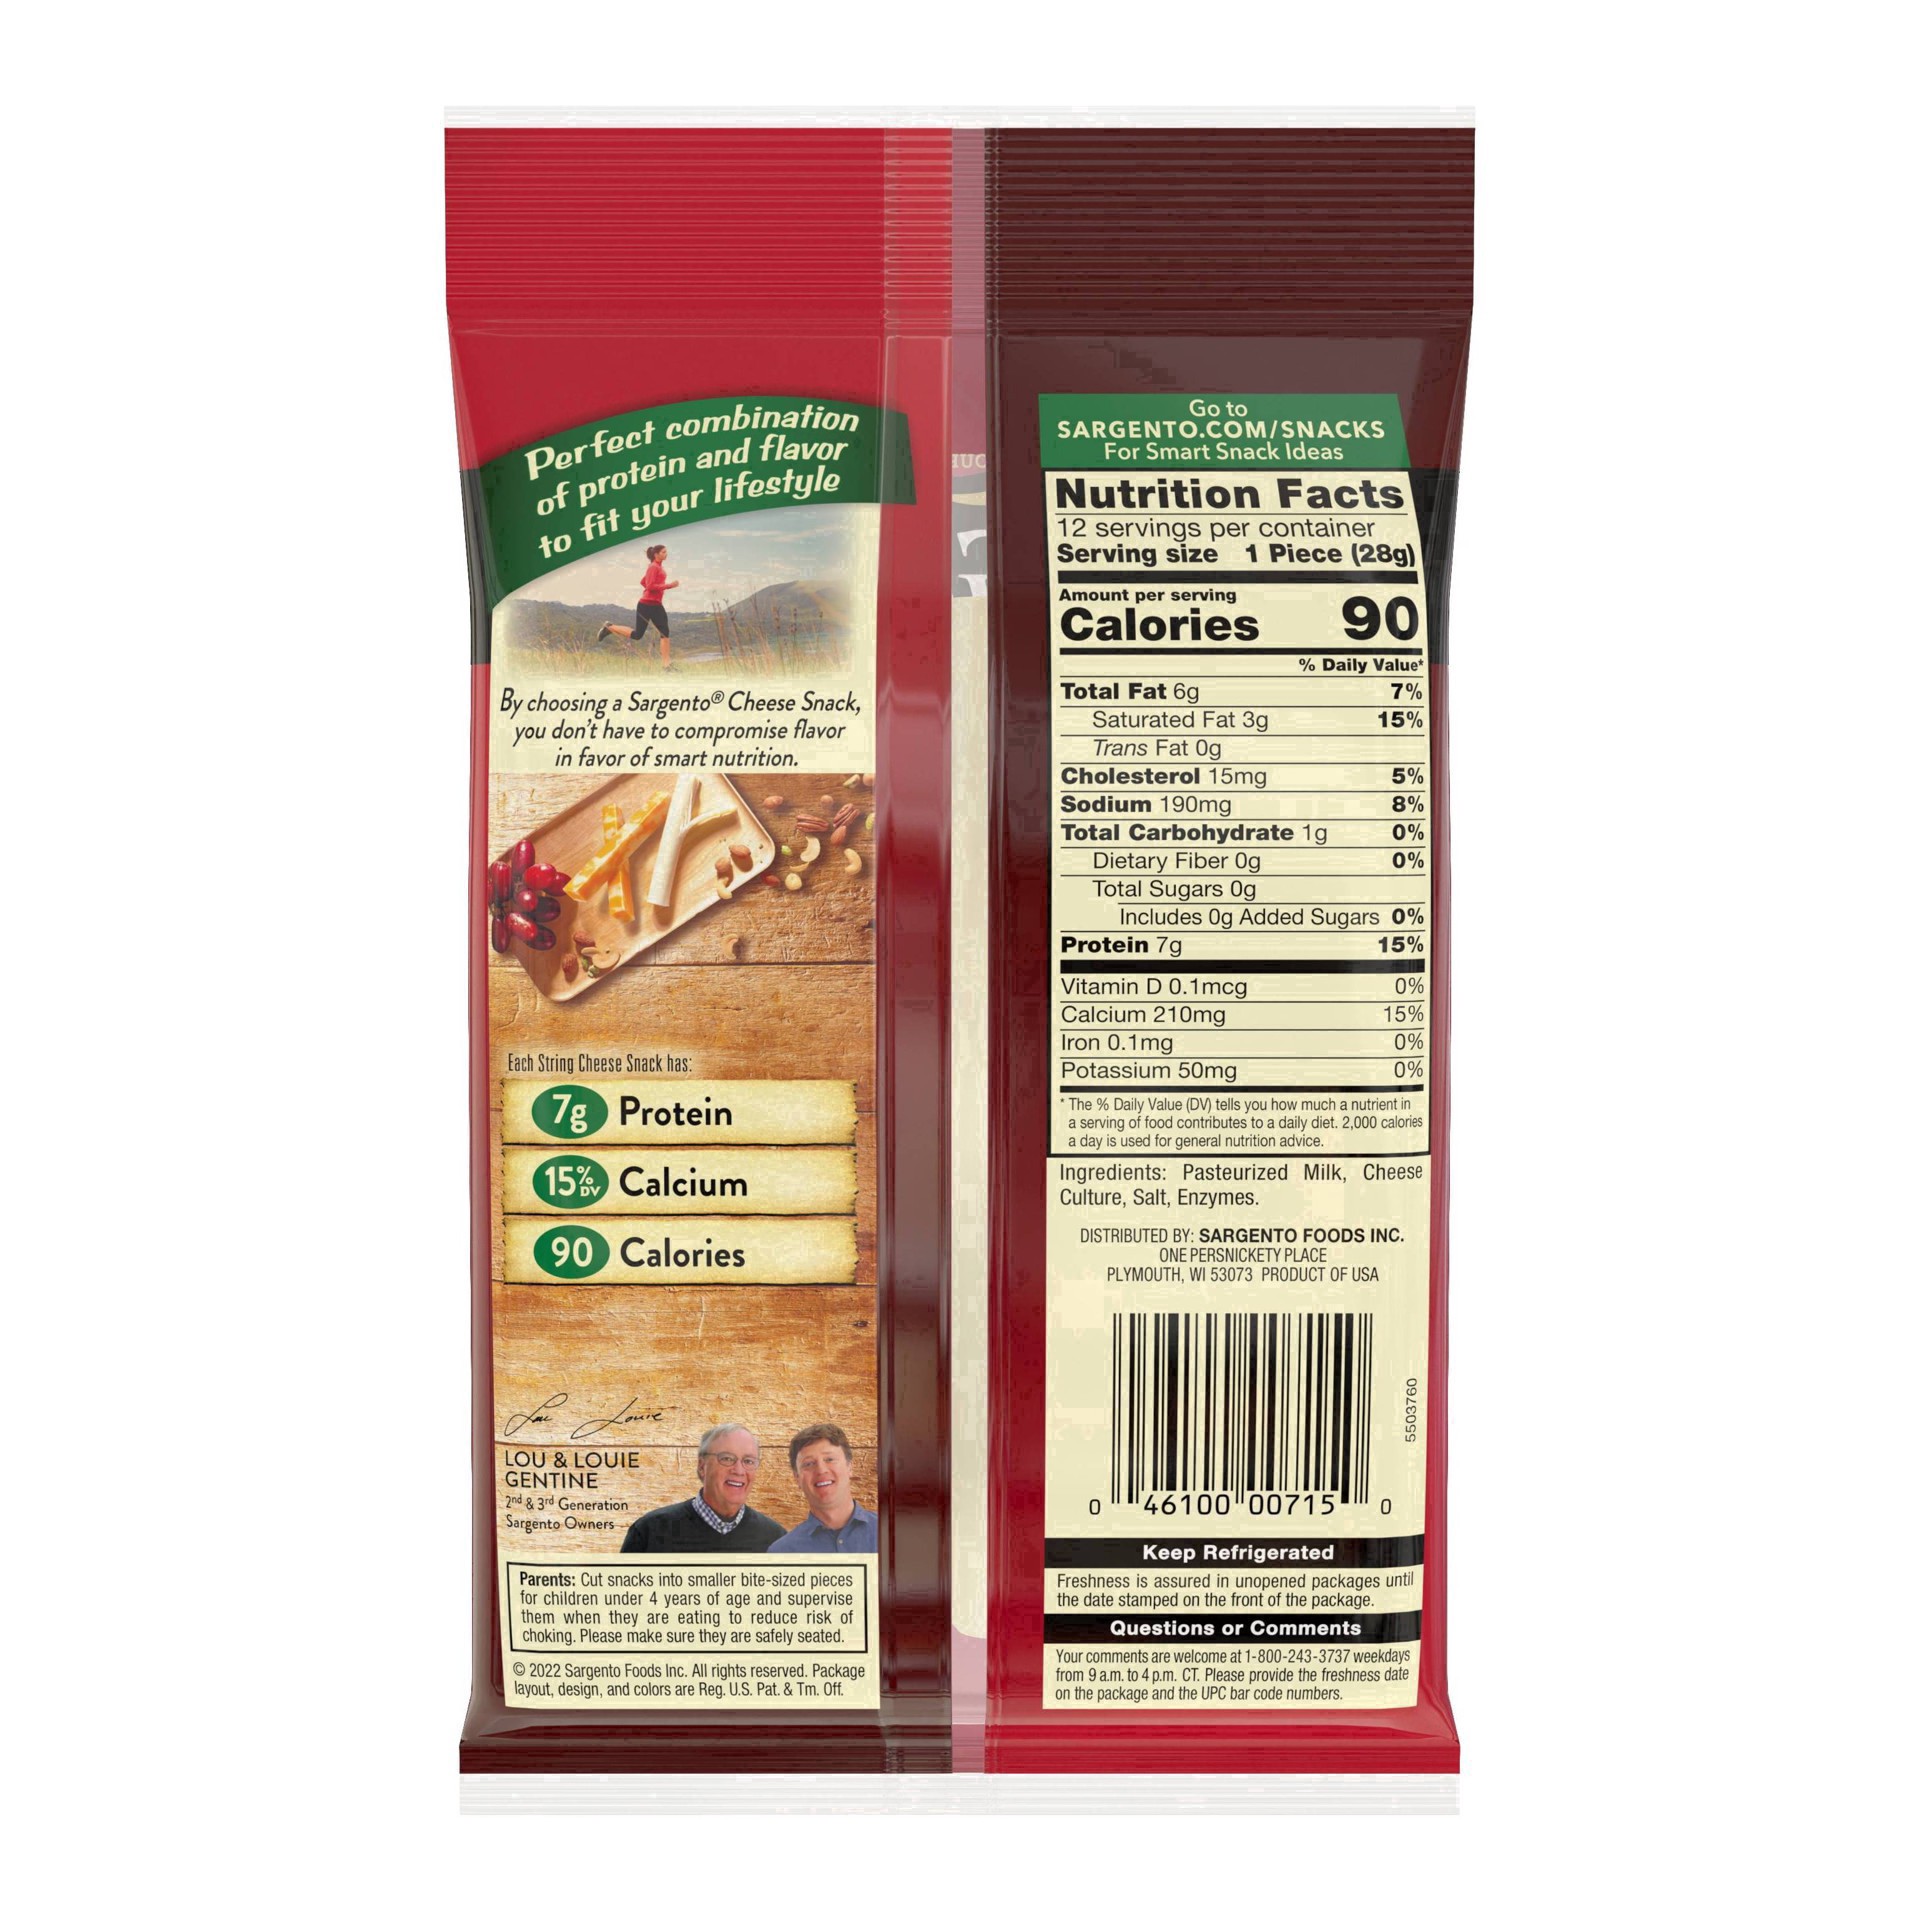 slide 41 of 76, Sargento Natural String Cheese Snacks, 12-Count, 12 ct